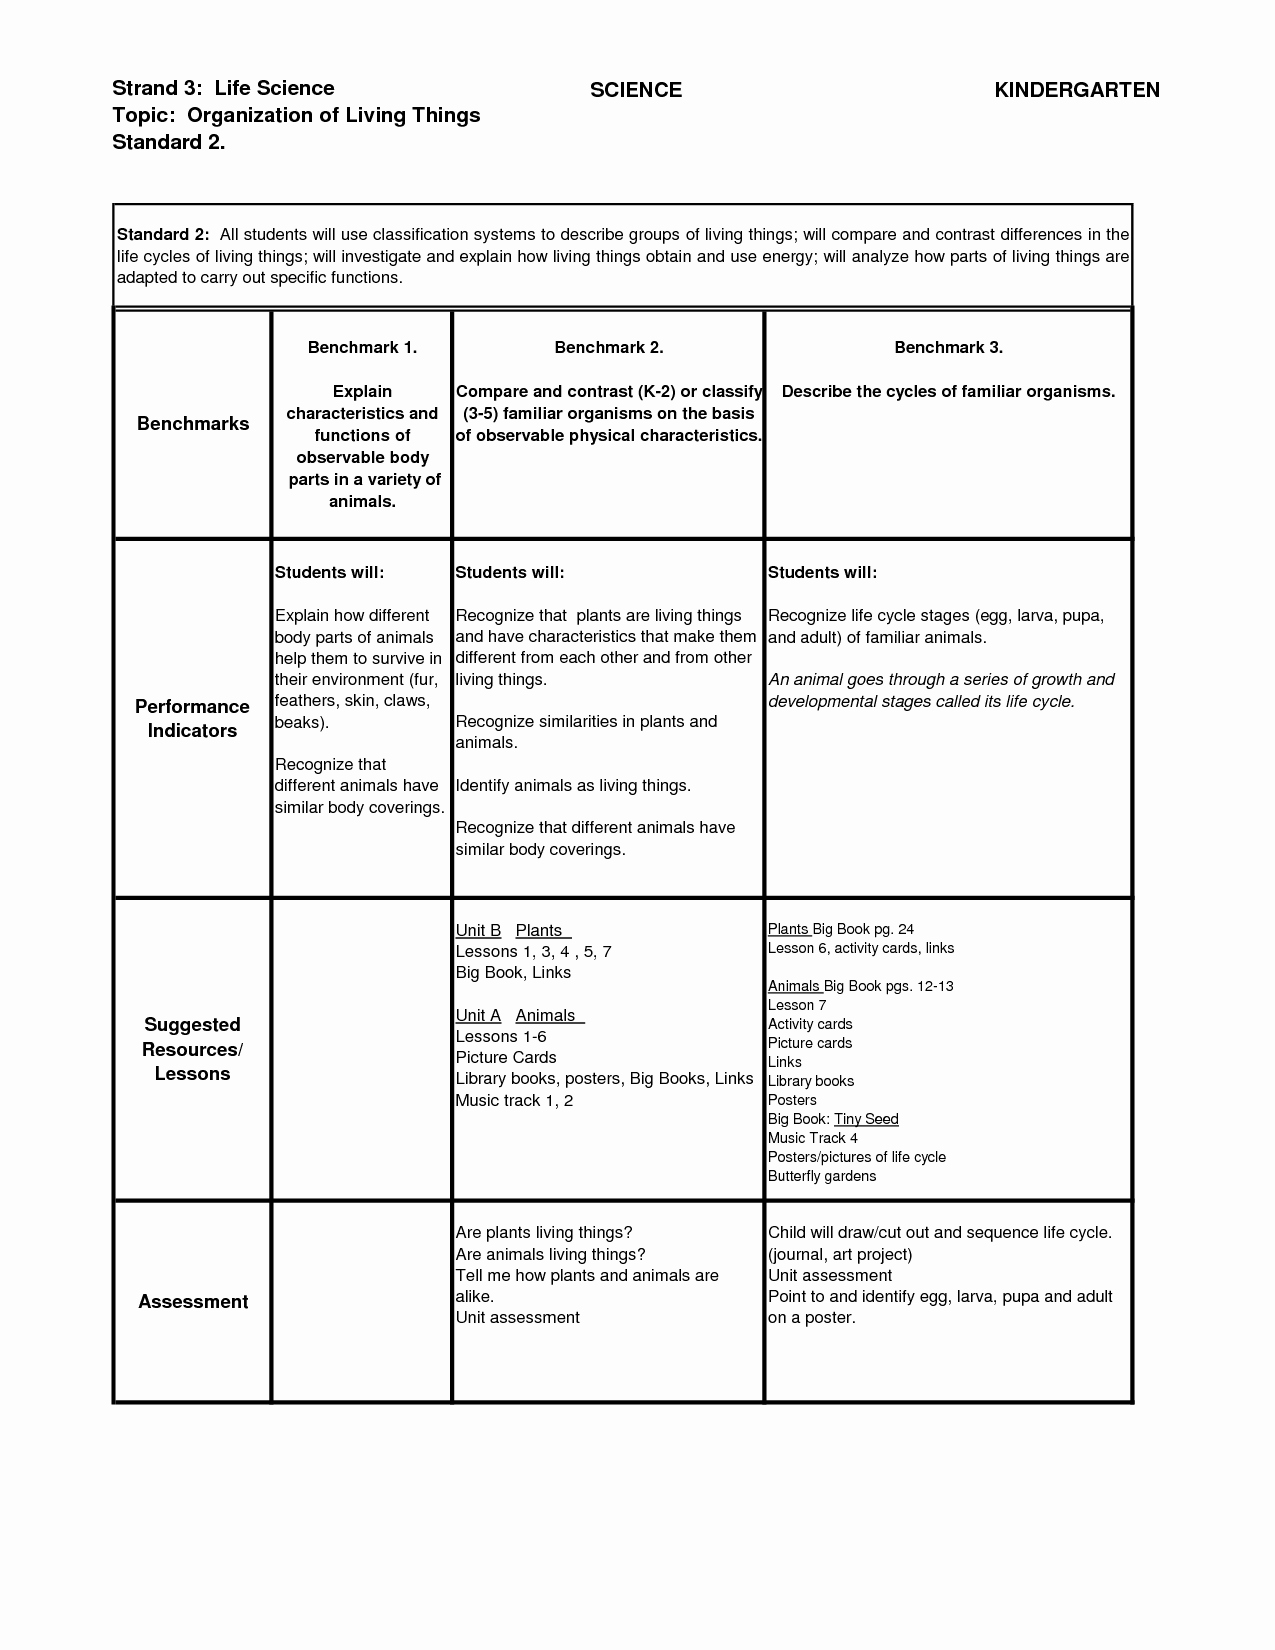 Biological Classification Worksheet Answers Luxury Classification Worksheet Answer Key Biology Corner